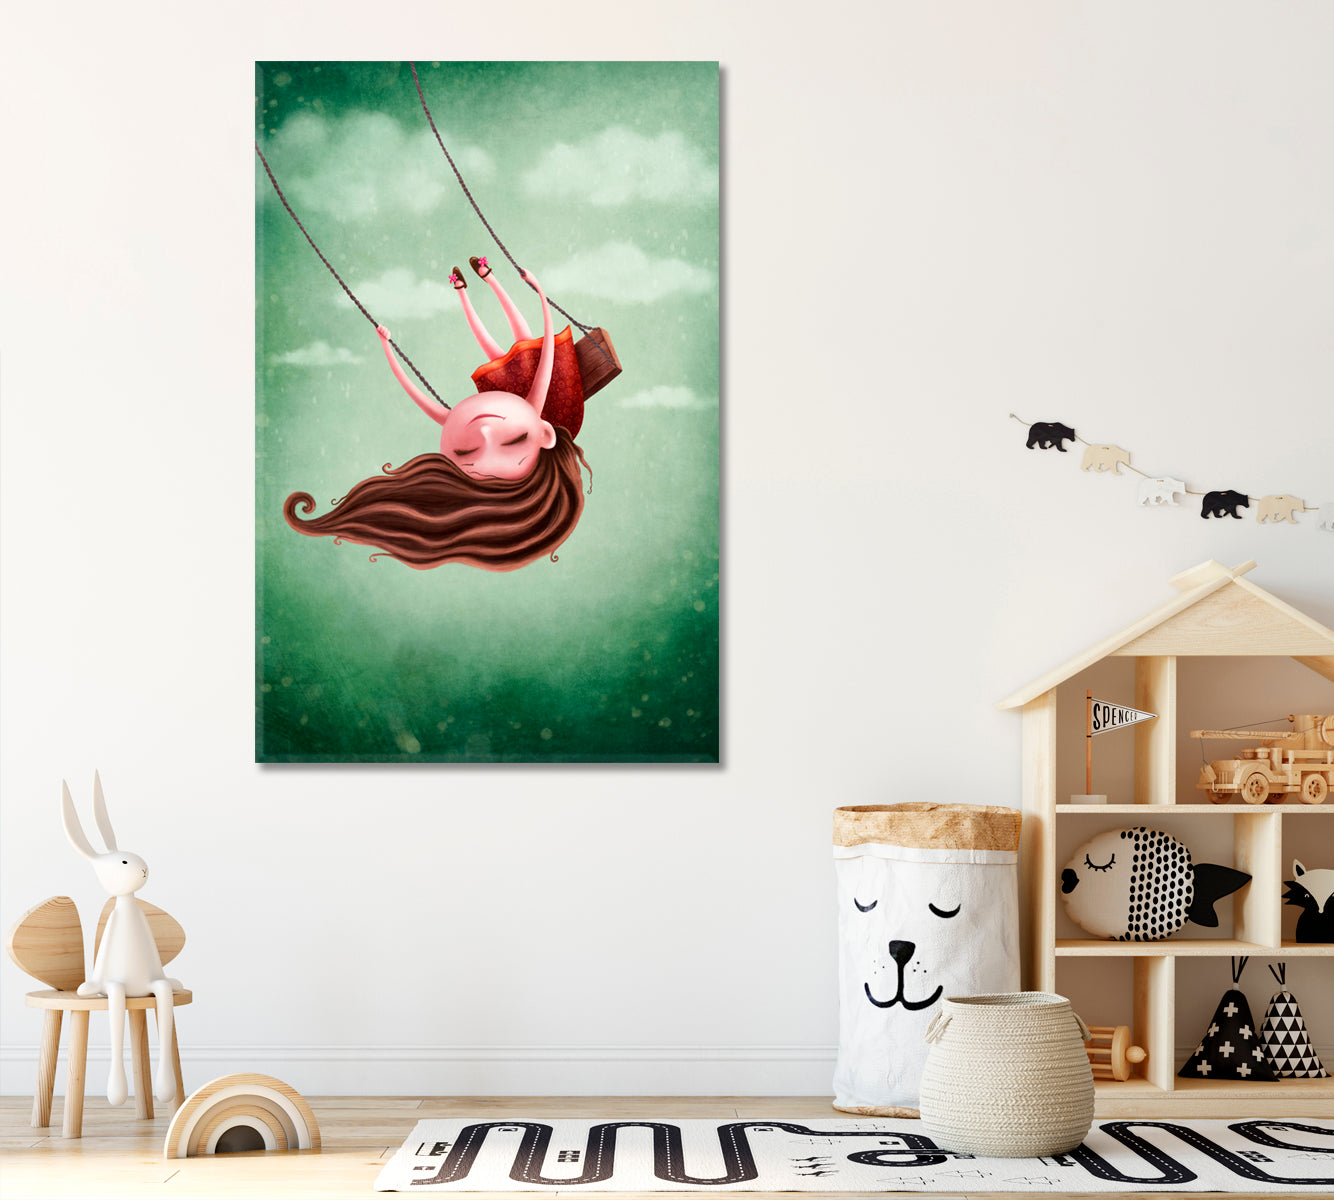 Little Girl on Swing Canvas Print ArtLexy 1 Panel 16"x24" inches 